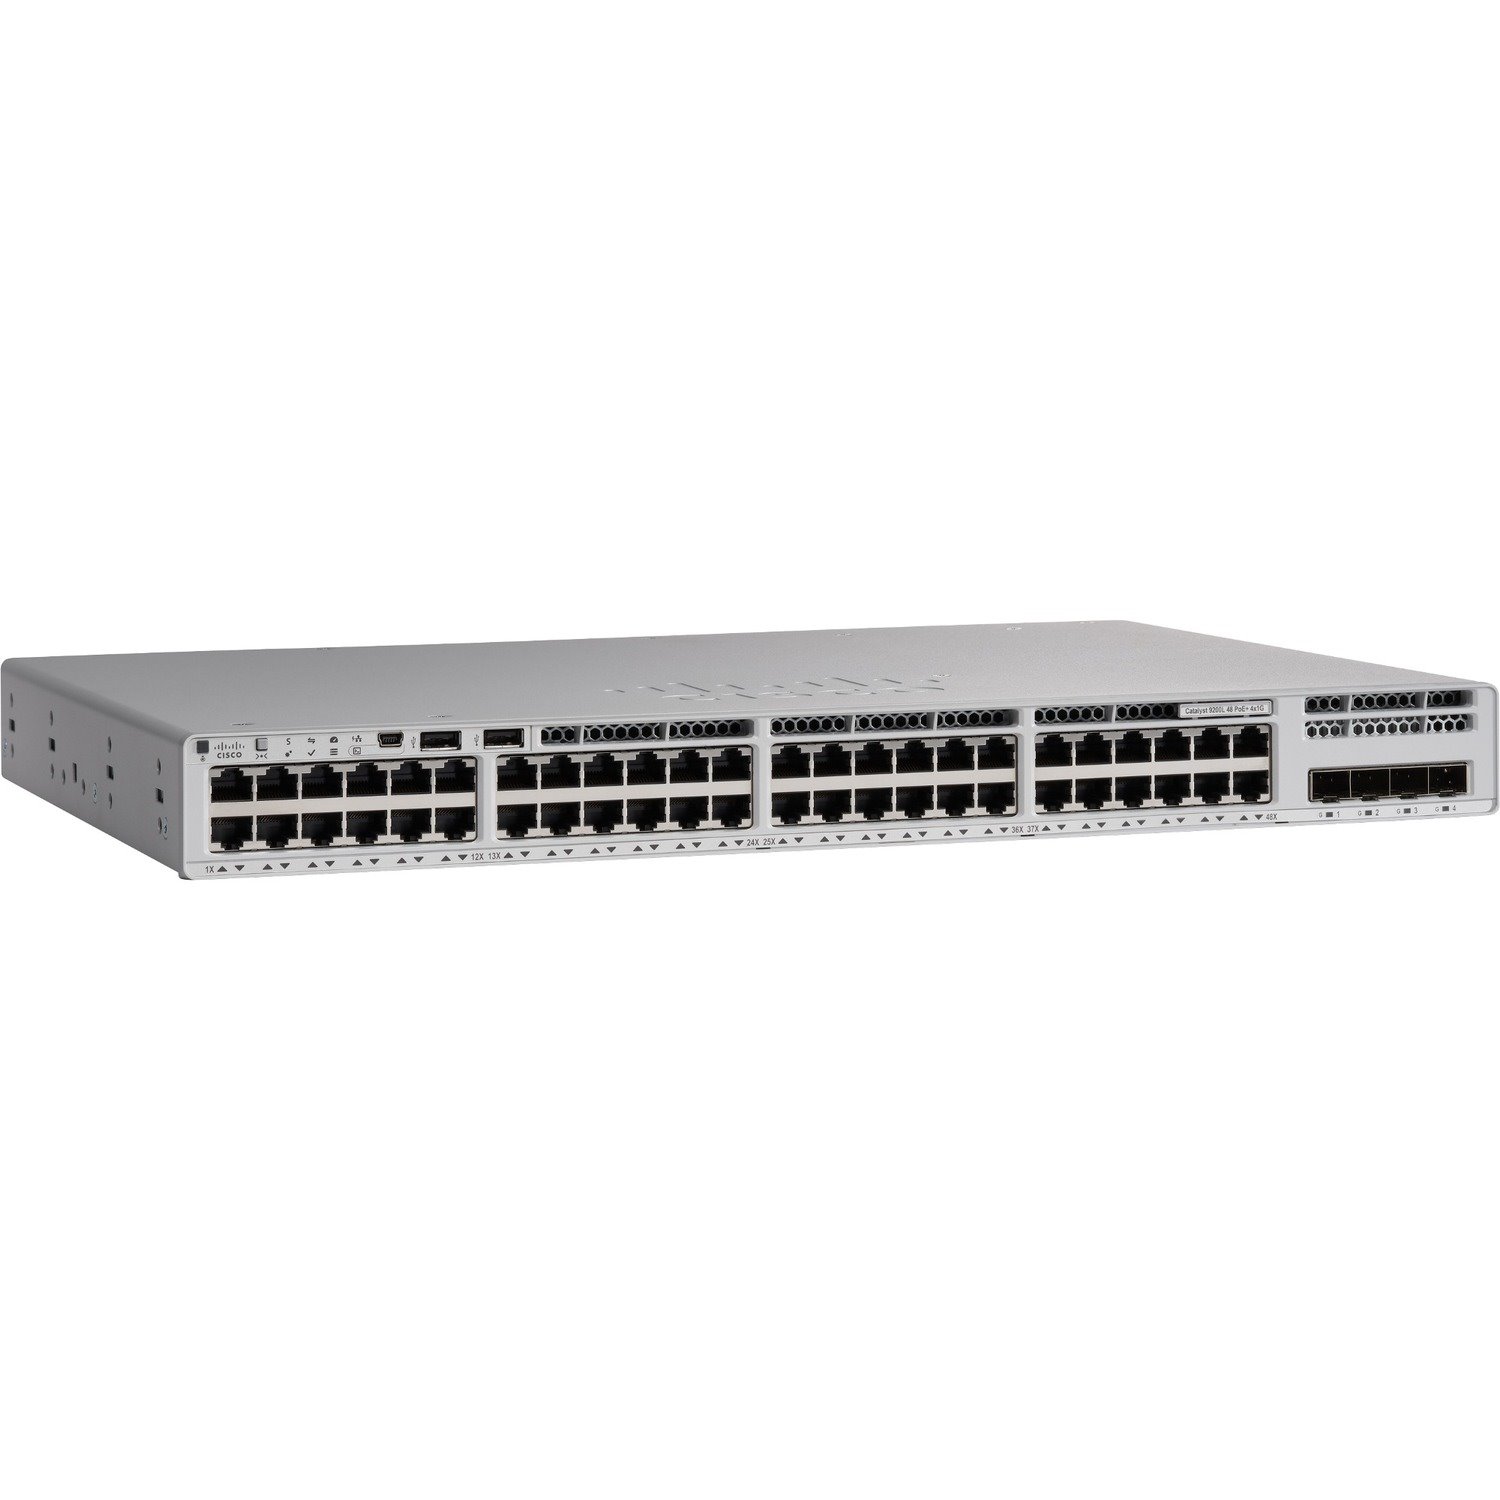 Cisco Catalyst 9200 C9200L-48P-4G 48 Ports Manageable Ethernet Switch - Refurbished